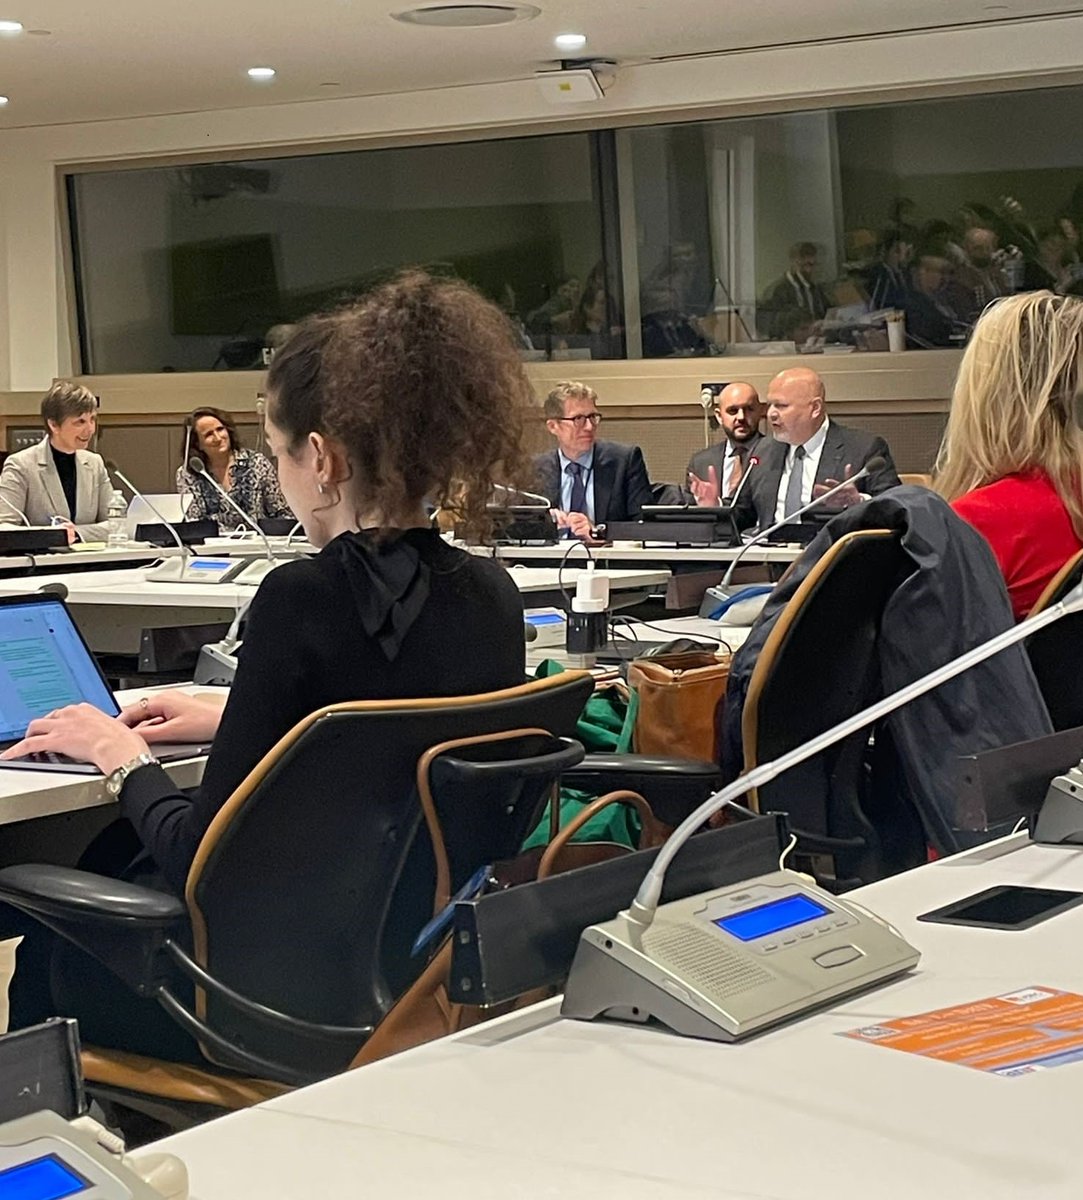 FCDO Legal Director Andrew Murdoch introduced an #ASP22 event co-hosted by 🇬🇧, 🇨🇴 and the #ICC Office of the Prosecutor on #GenderPersecution. We discussed potential new draft principles on #GenderPersecution to enhance prevention, protection and survivor participation.